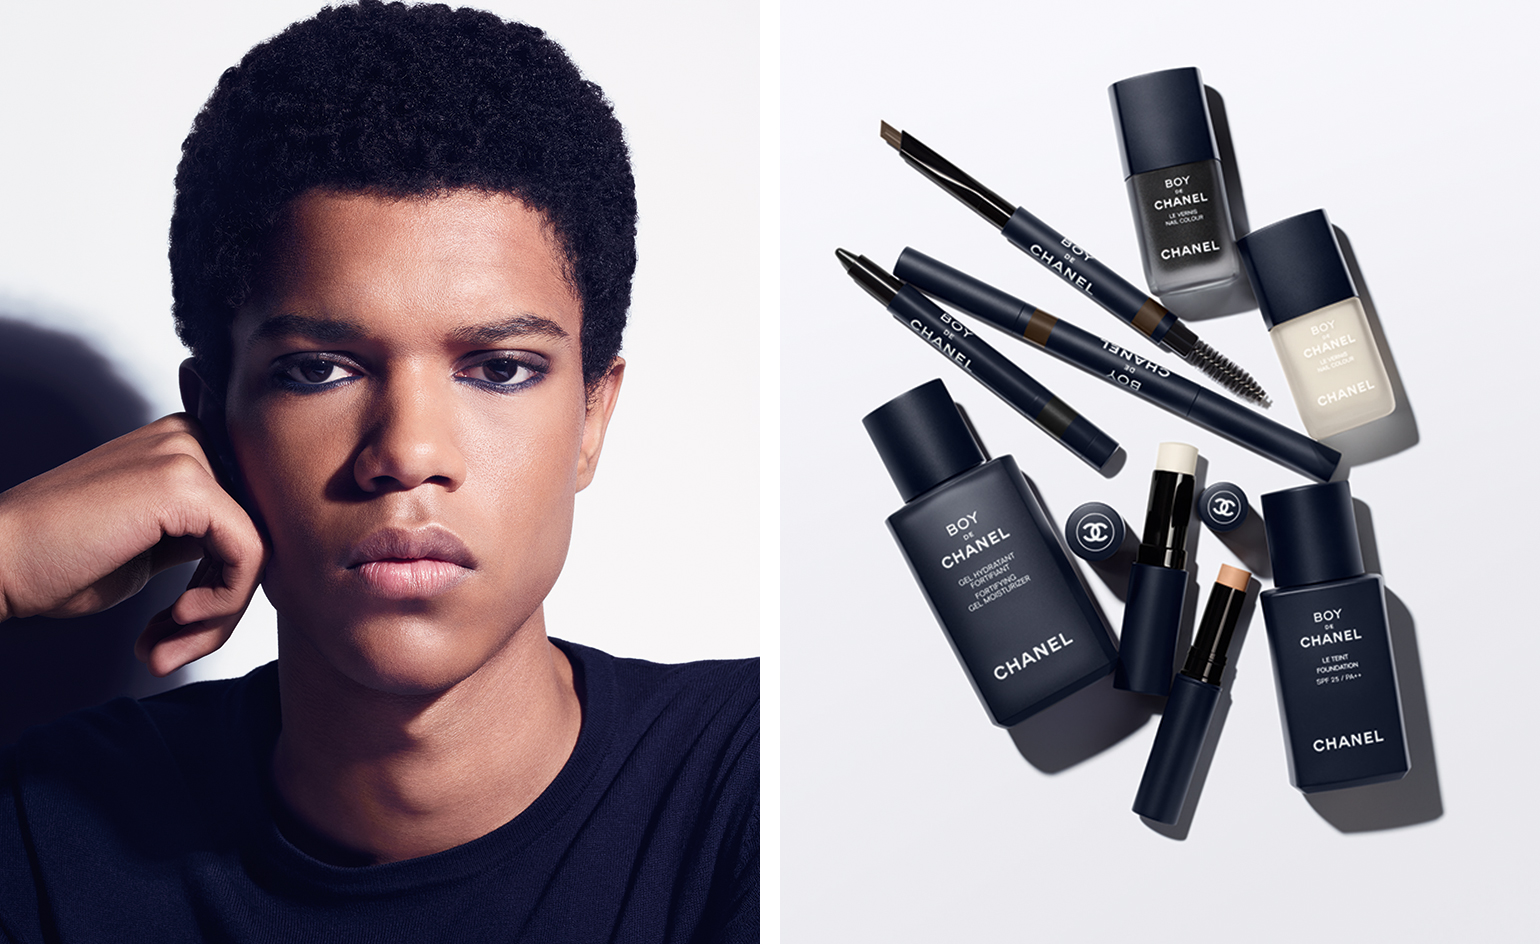 CHANEL - BOY DE CHANEL. The makeup and skincare line for